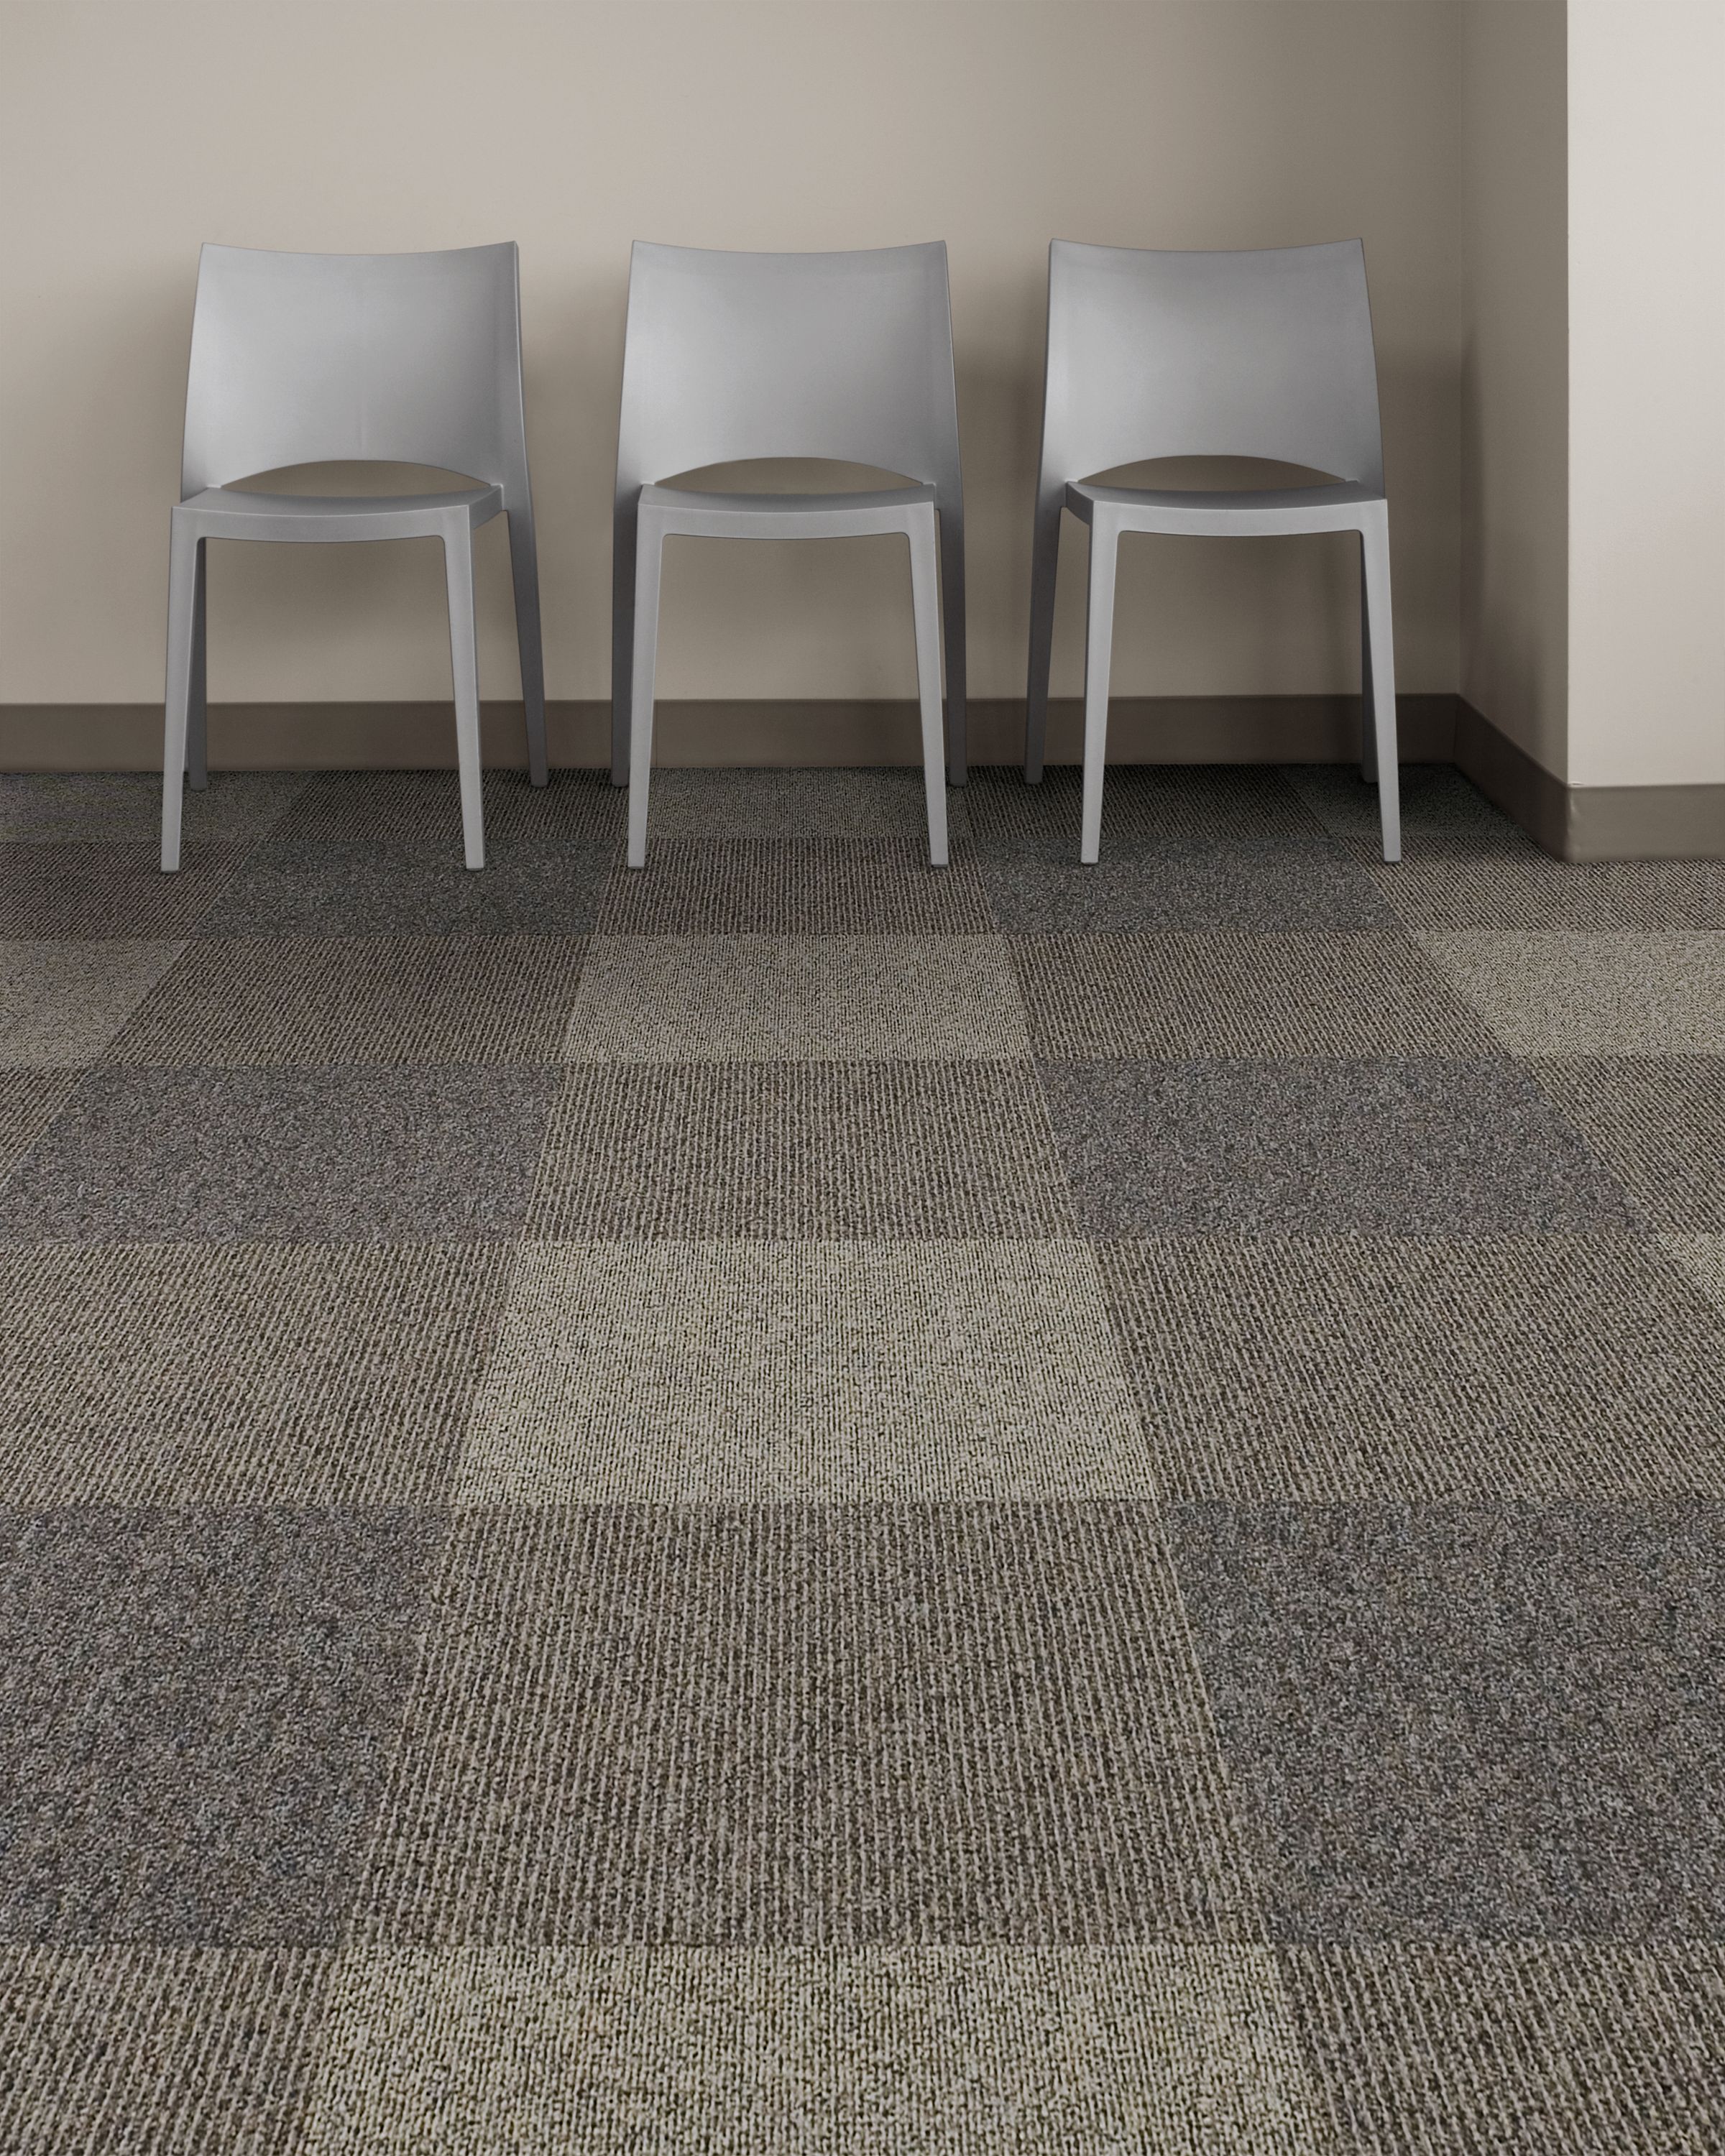 Interface Broomed, Grooved and Brushed carpet tile in room with three chairs imagen número 7